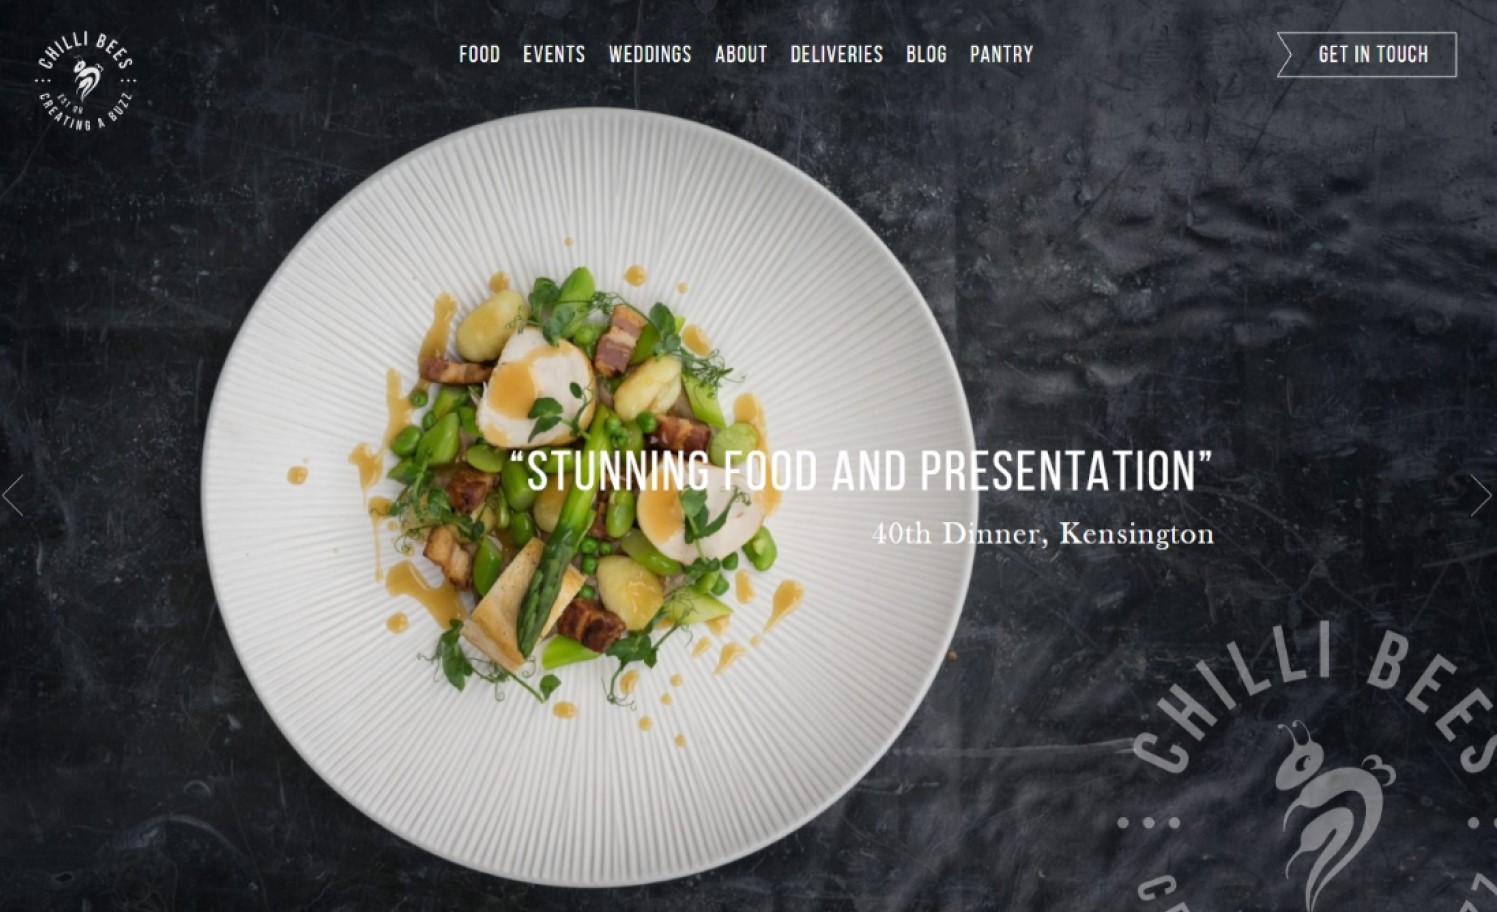 catering website examples